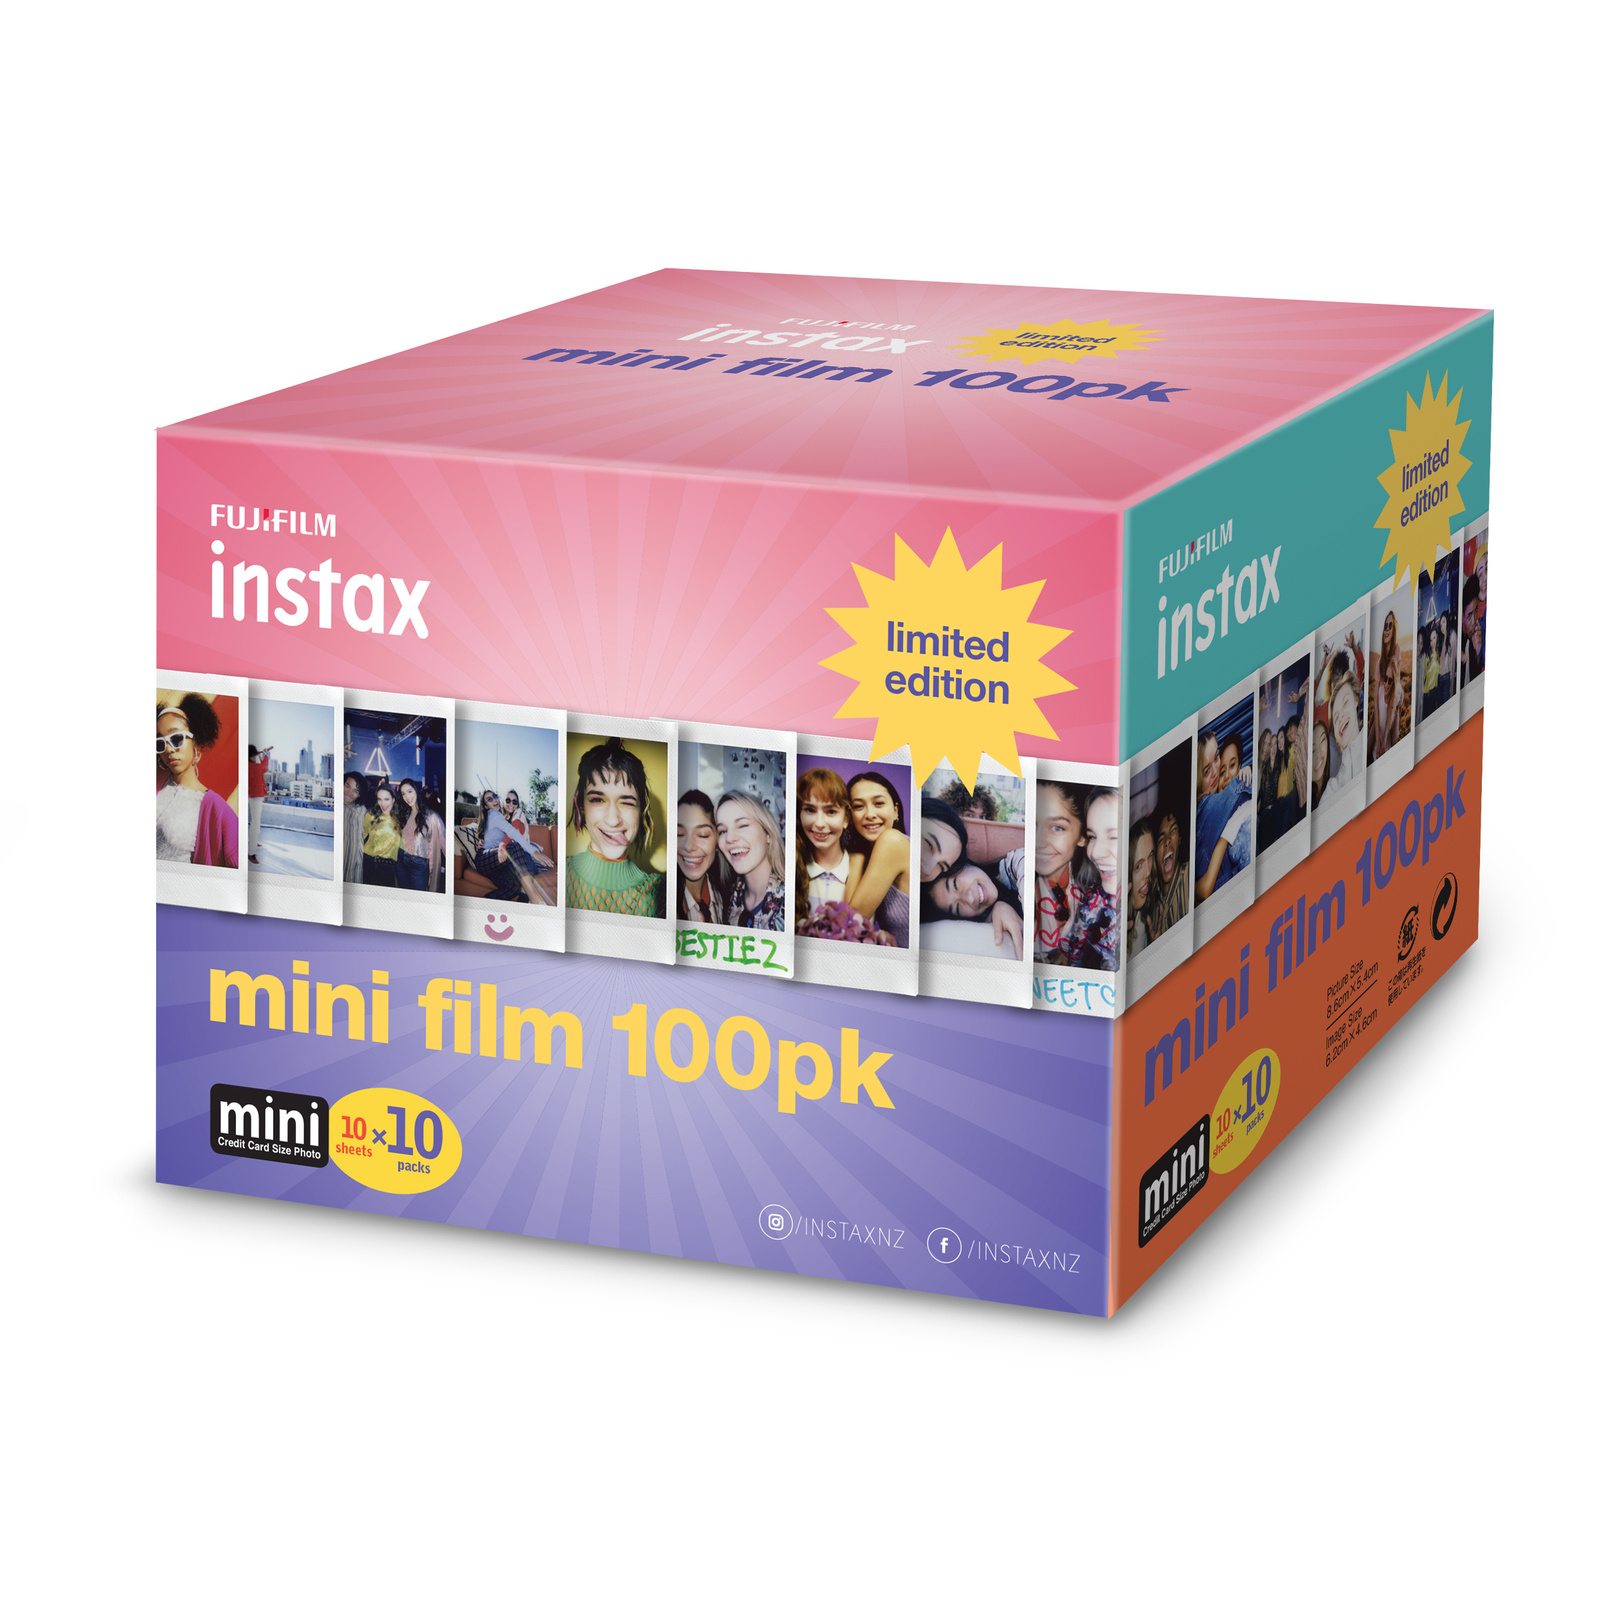 poll Kano accu Buy the FujiFilm Instax Mini Film 100 Pack Limited edition ( 50195 ) online  - PBTech.com